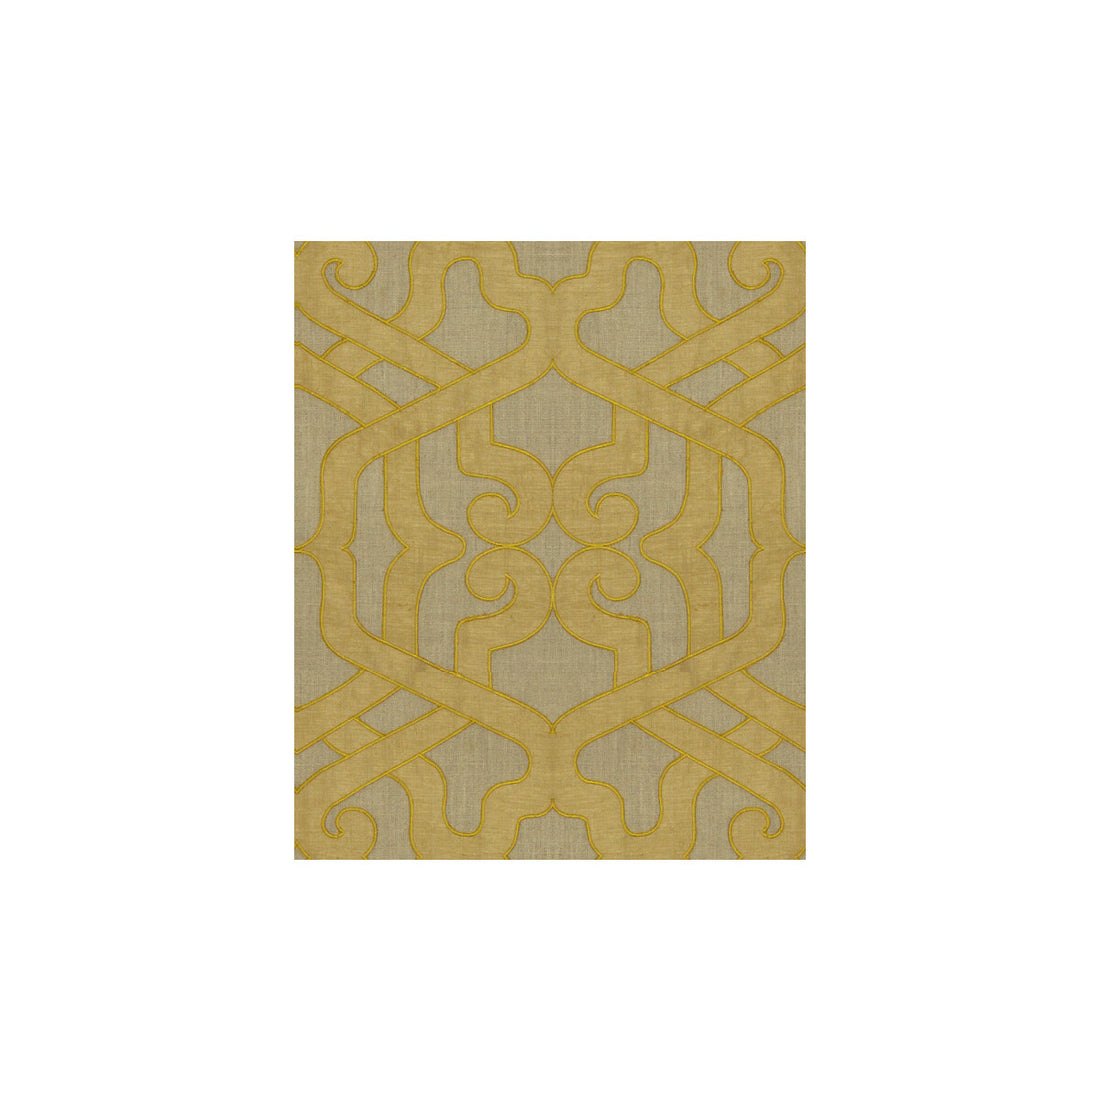 Modern Elegance fabric in saffron color - pattern 32076.14.0 - by Kravet Couture in the Modern Colors II collection